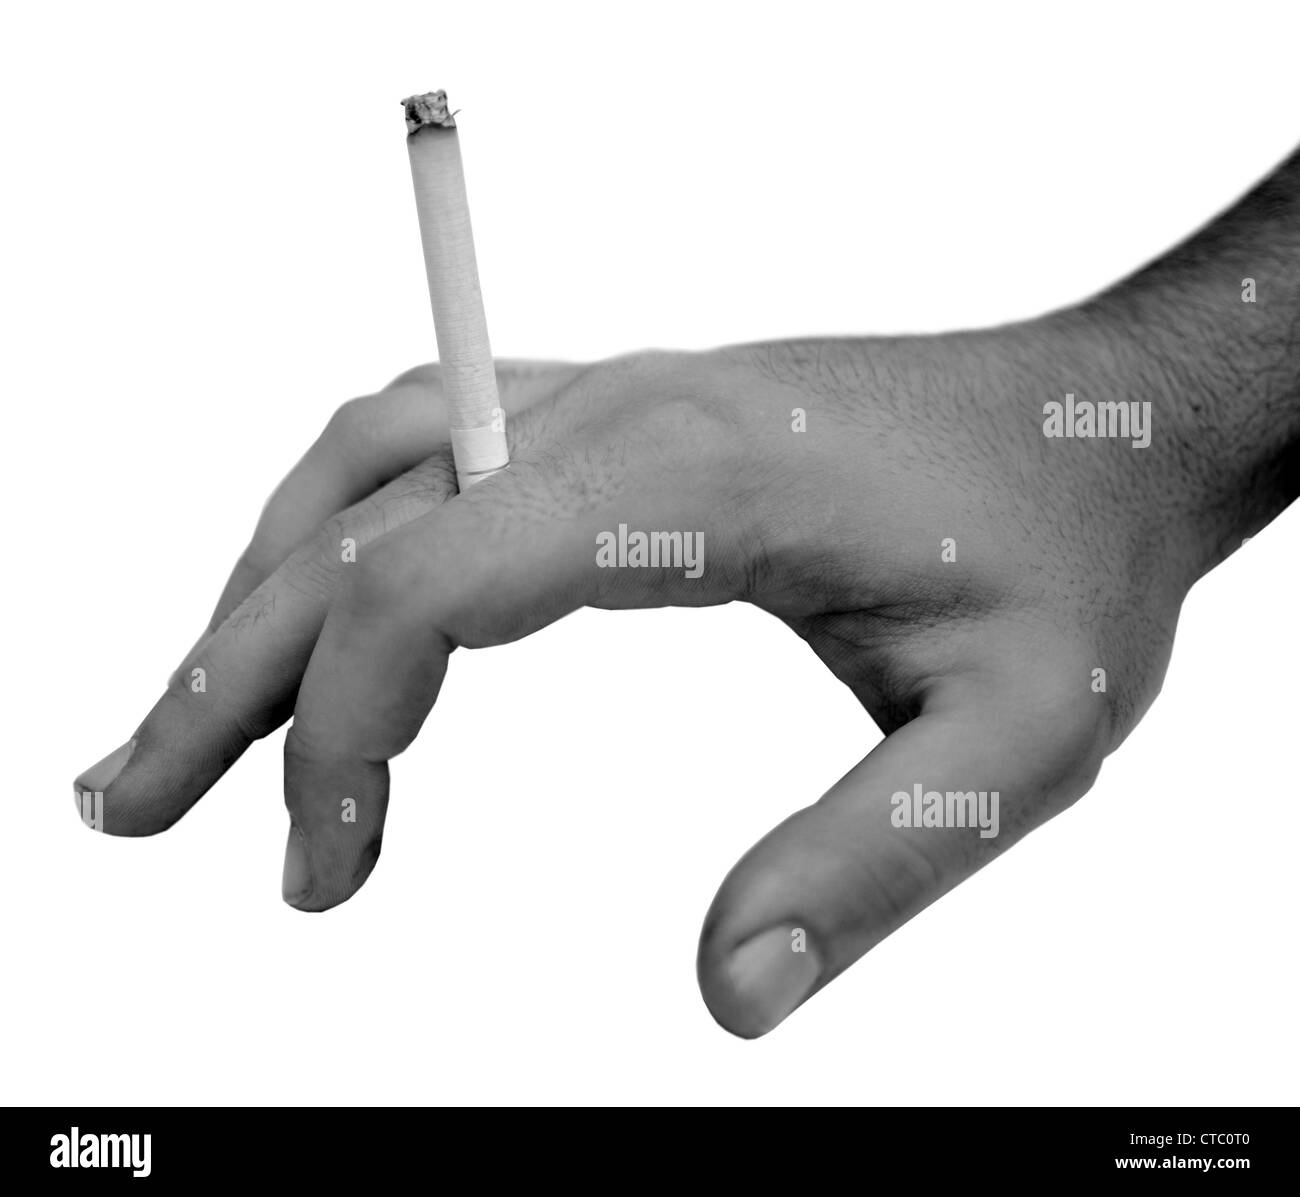 Human hand holding cigarette in black and white Stock Photo